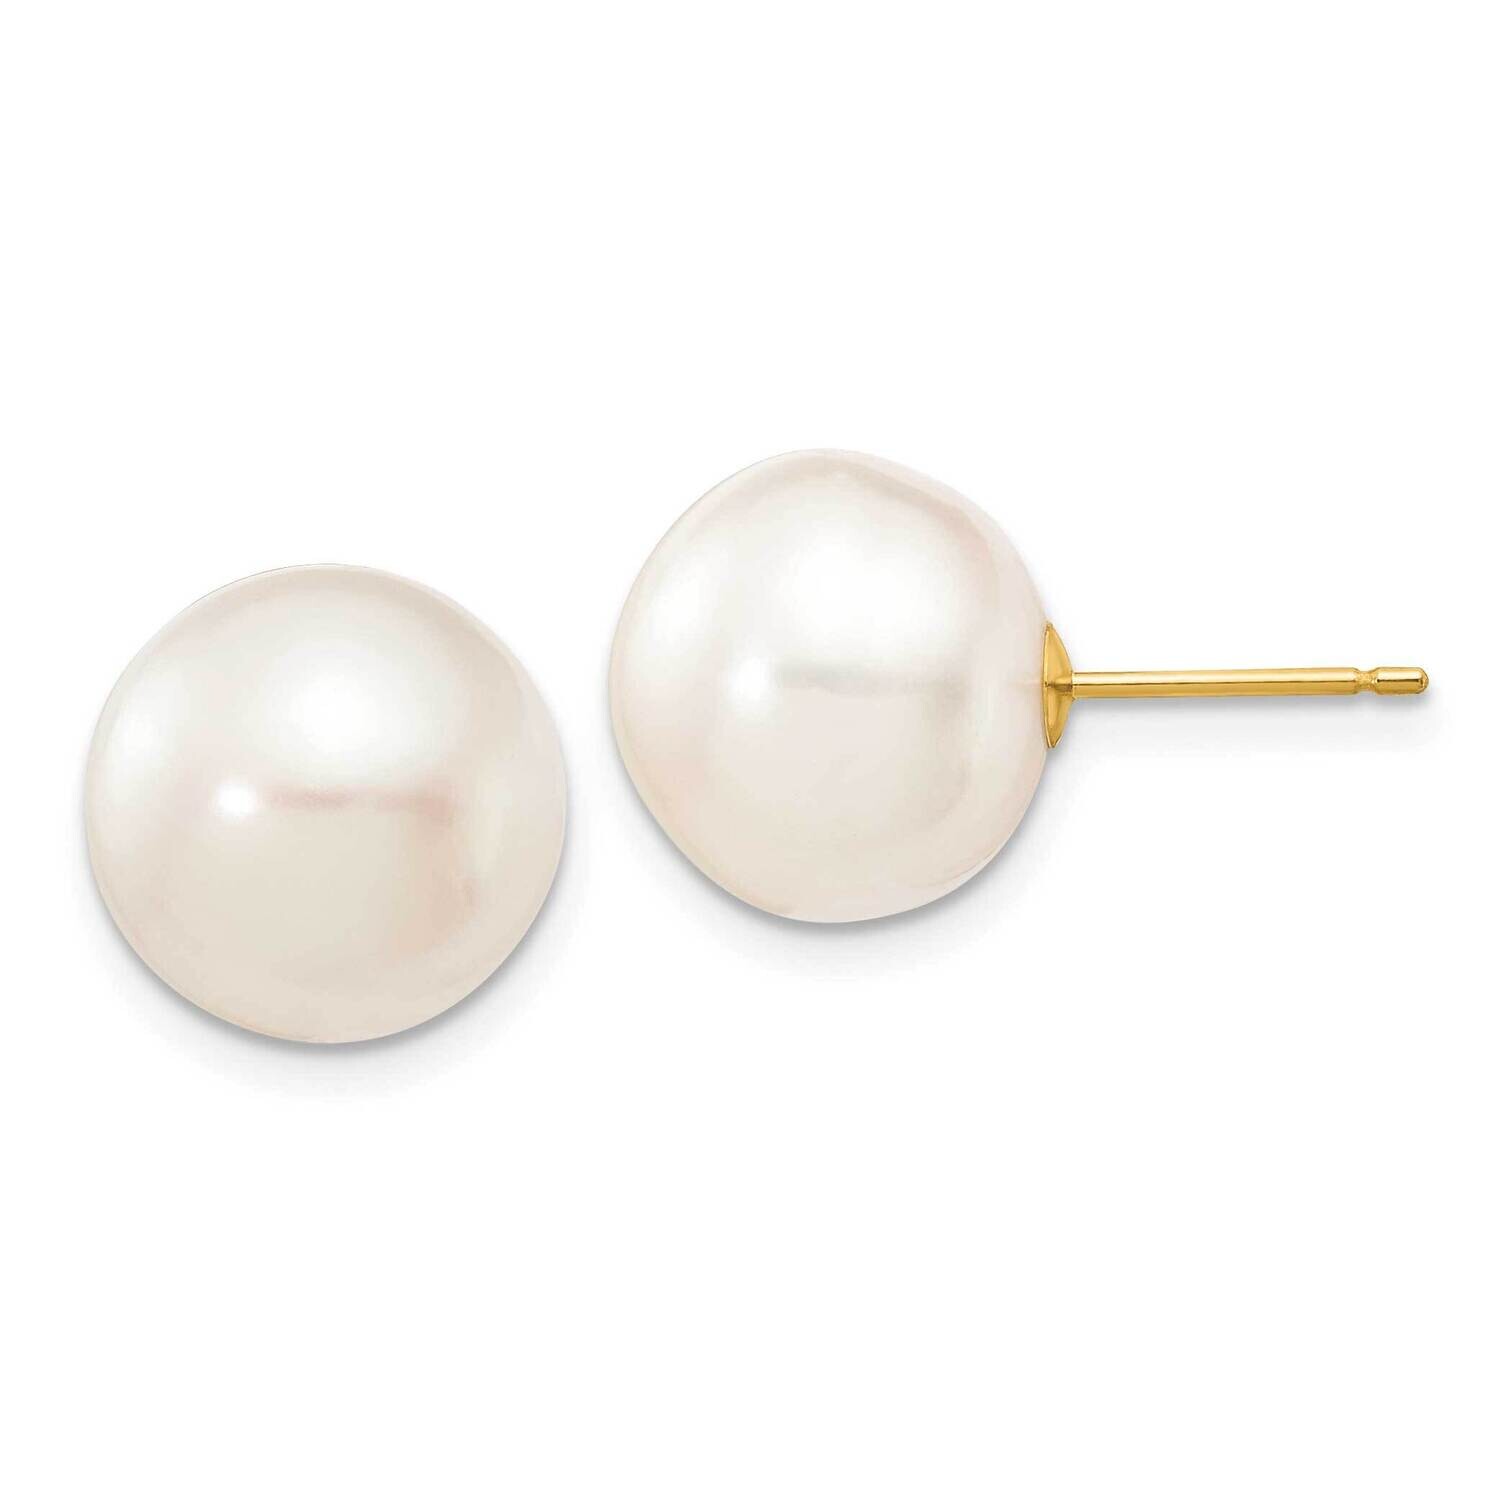 11-12mm White Button Freshwater Cultured Pearl Stud Post Earrings 10k Gold 10X110BW